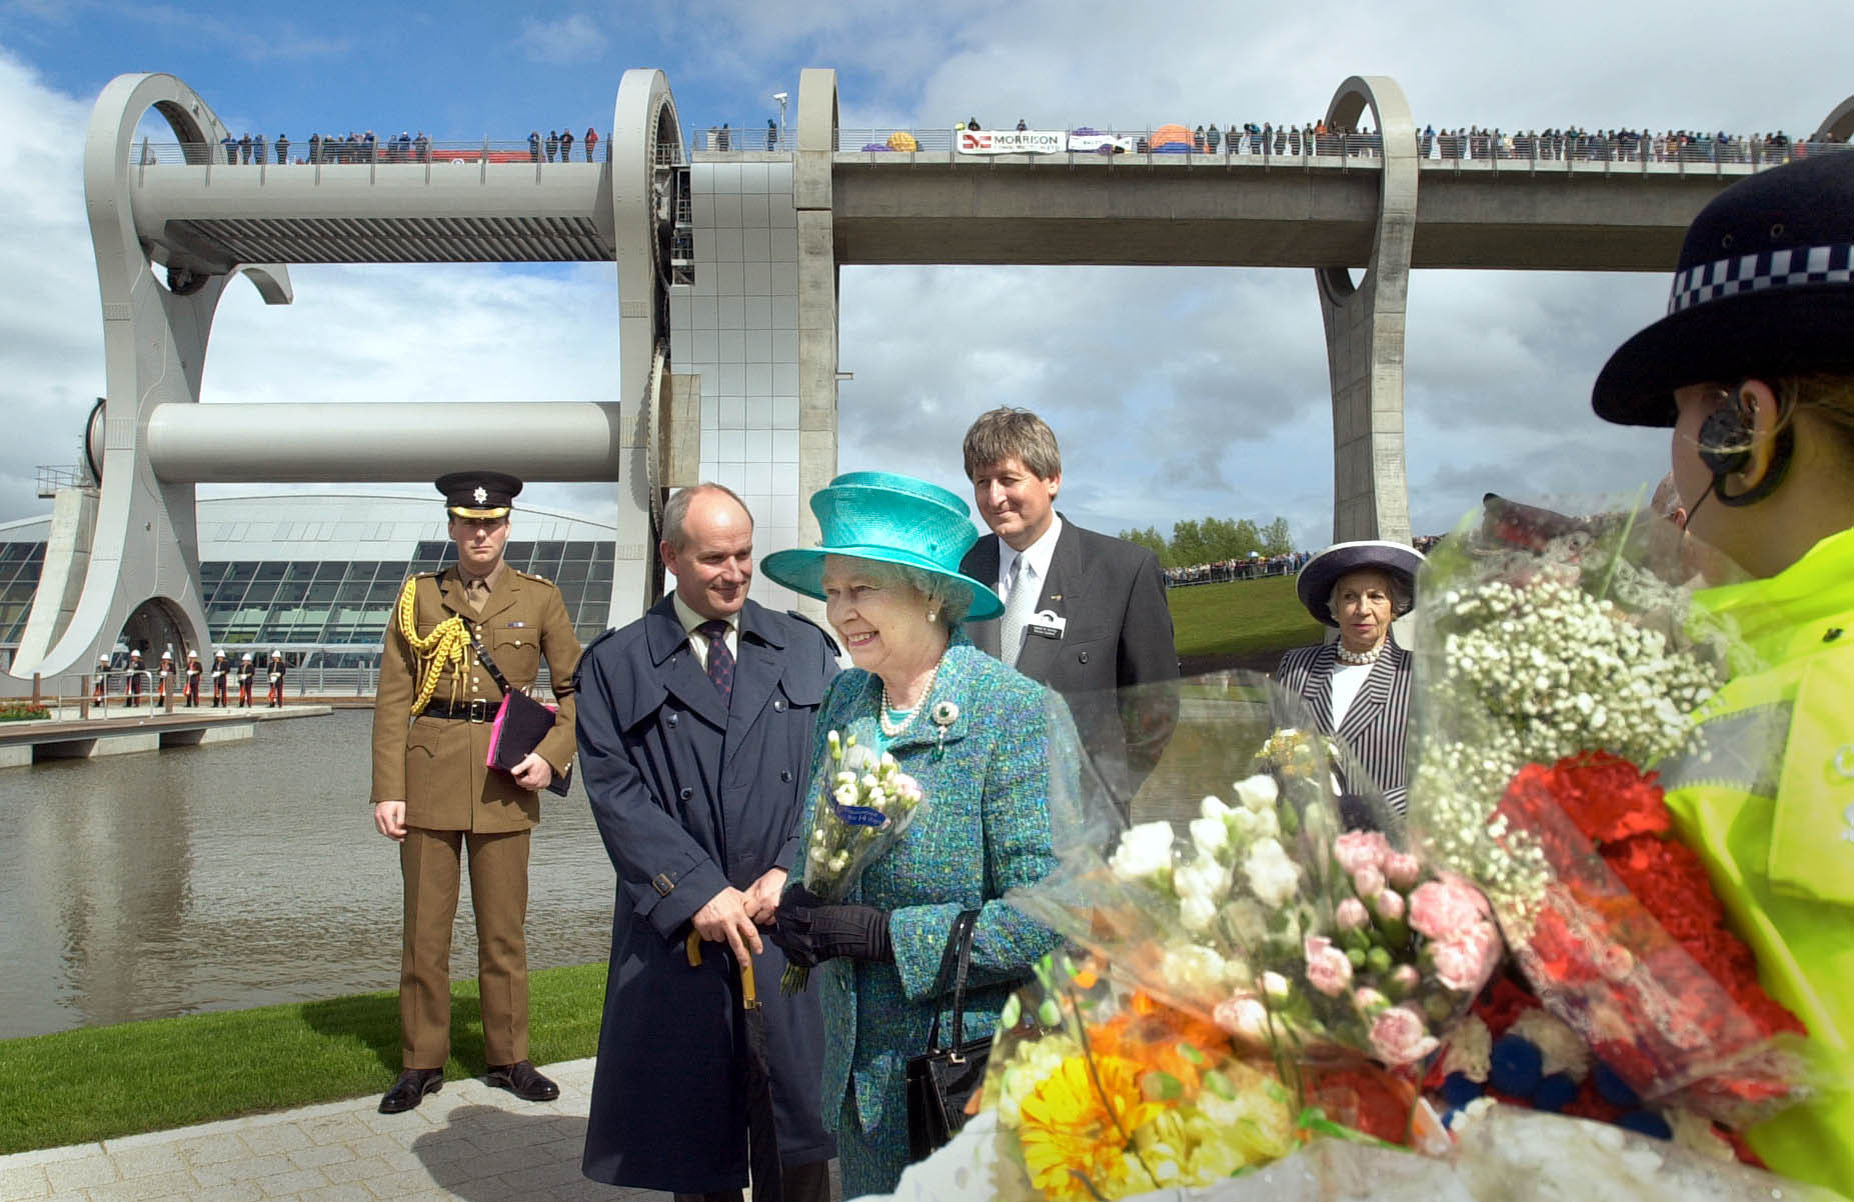 The Queen tours and officially opens the site of the Falkirk Wheel (Ben Curtis WPA/Rota)